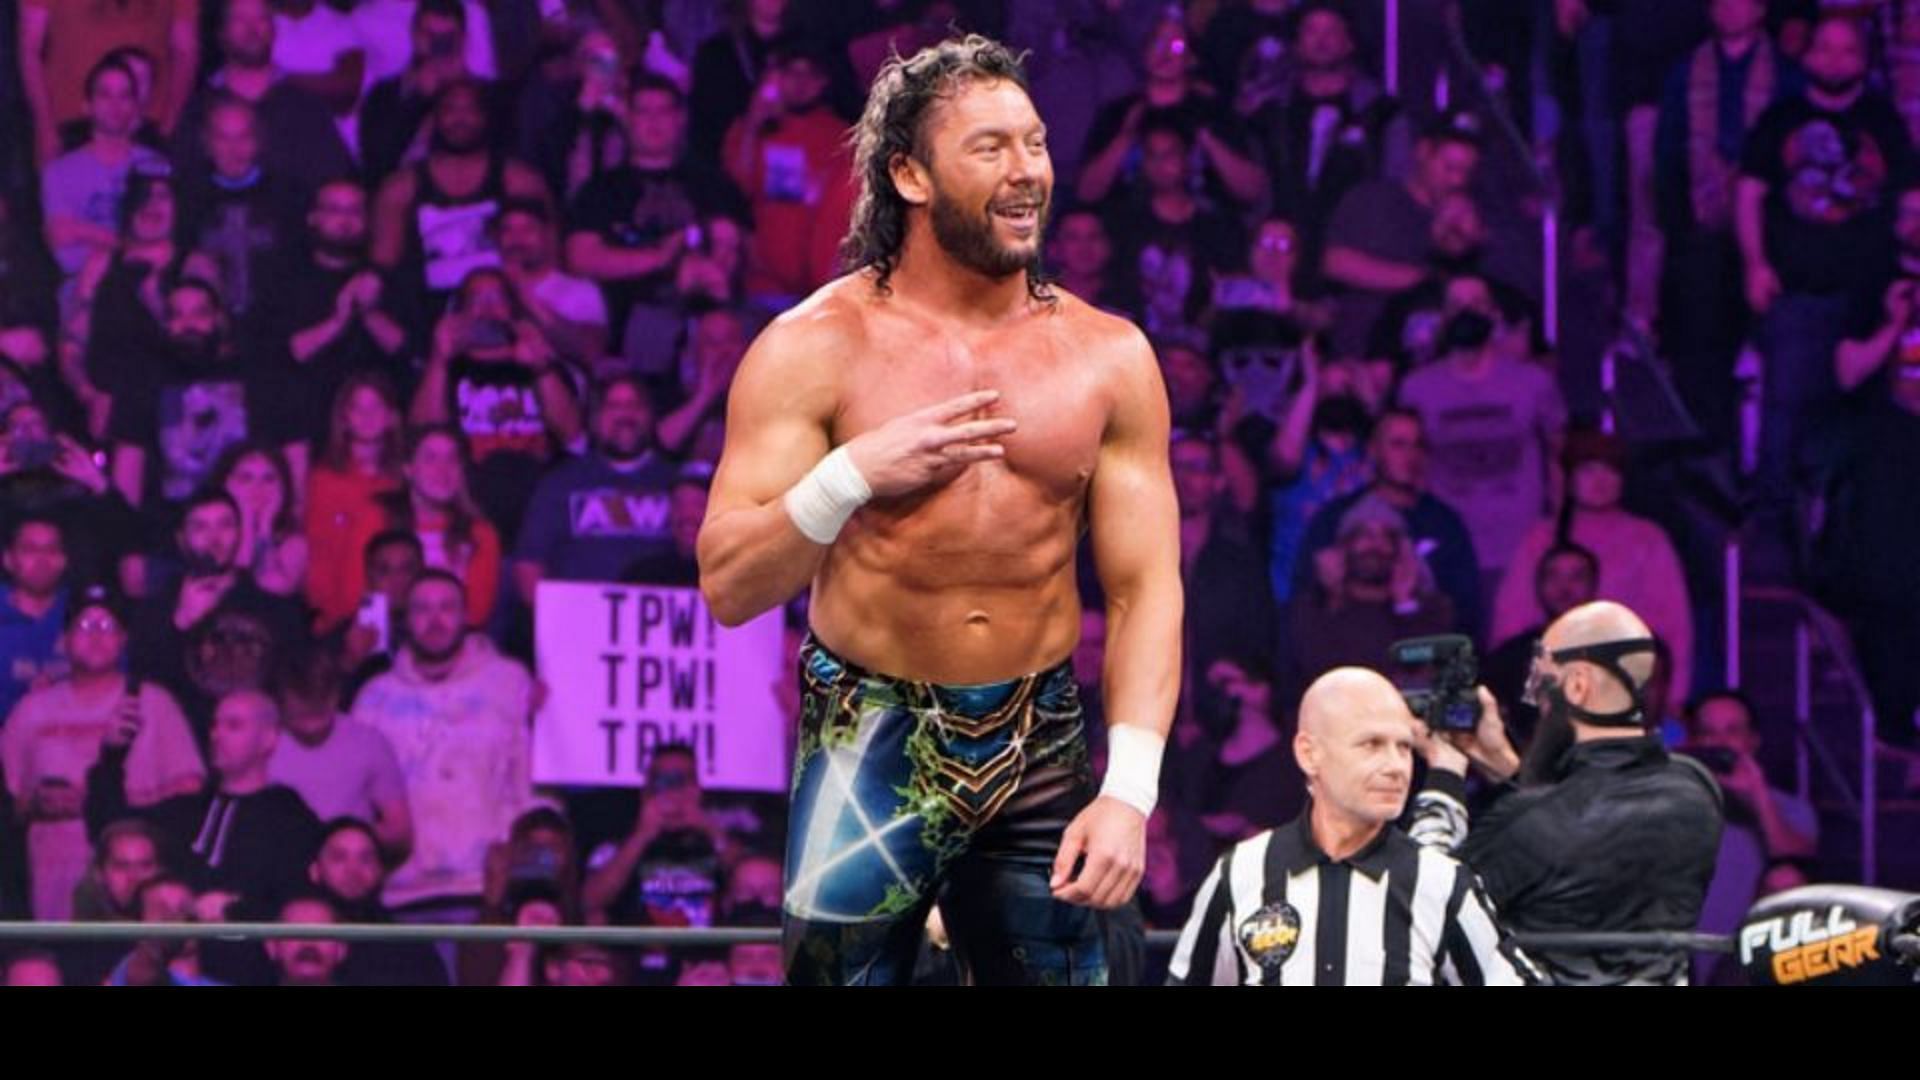 Kenny Omega is a former AEW World, Tag Team, and Trios Champion.